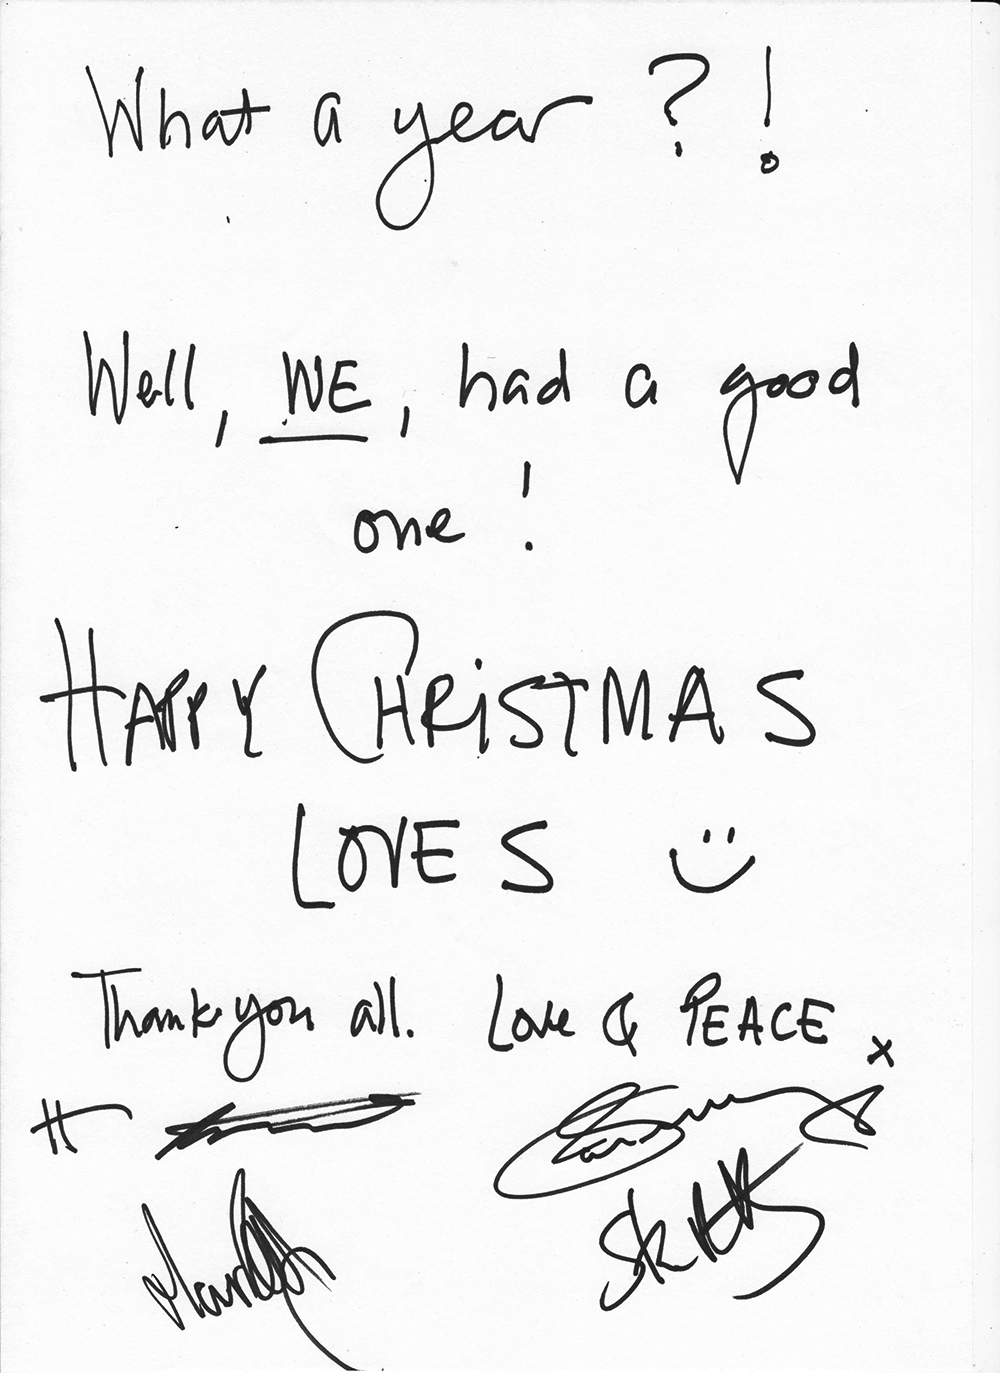 A Christmas message from the band